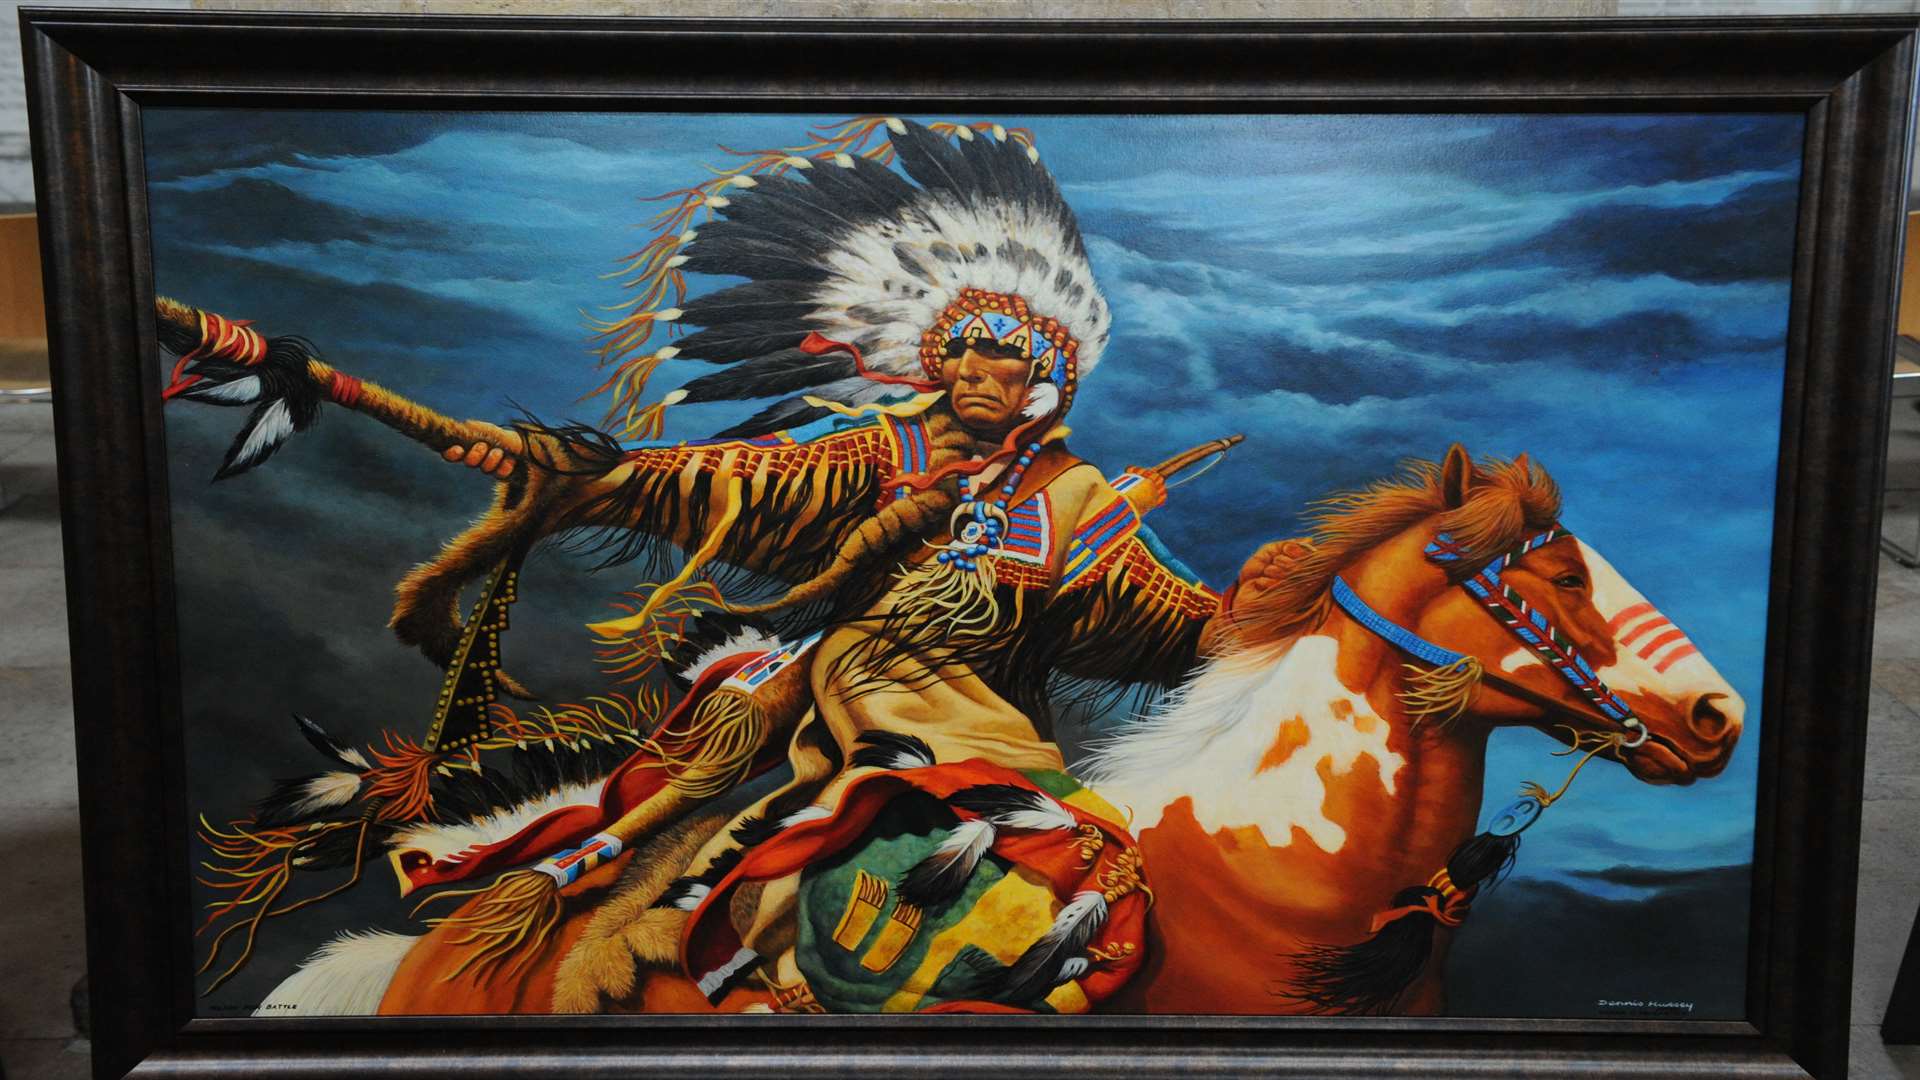 The series of 30 paintings is based on Native Americans